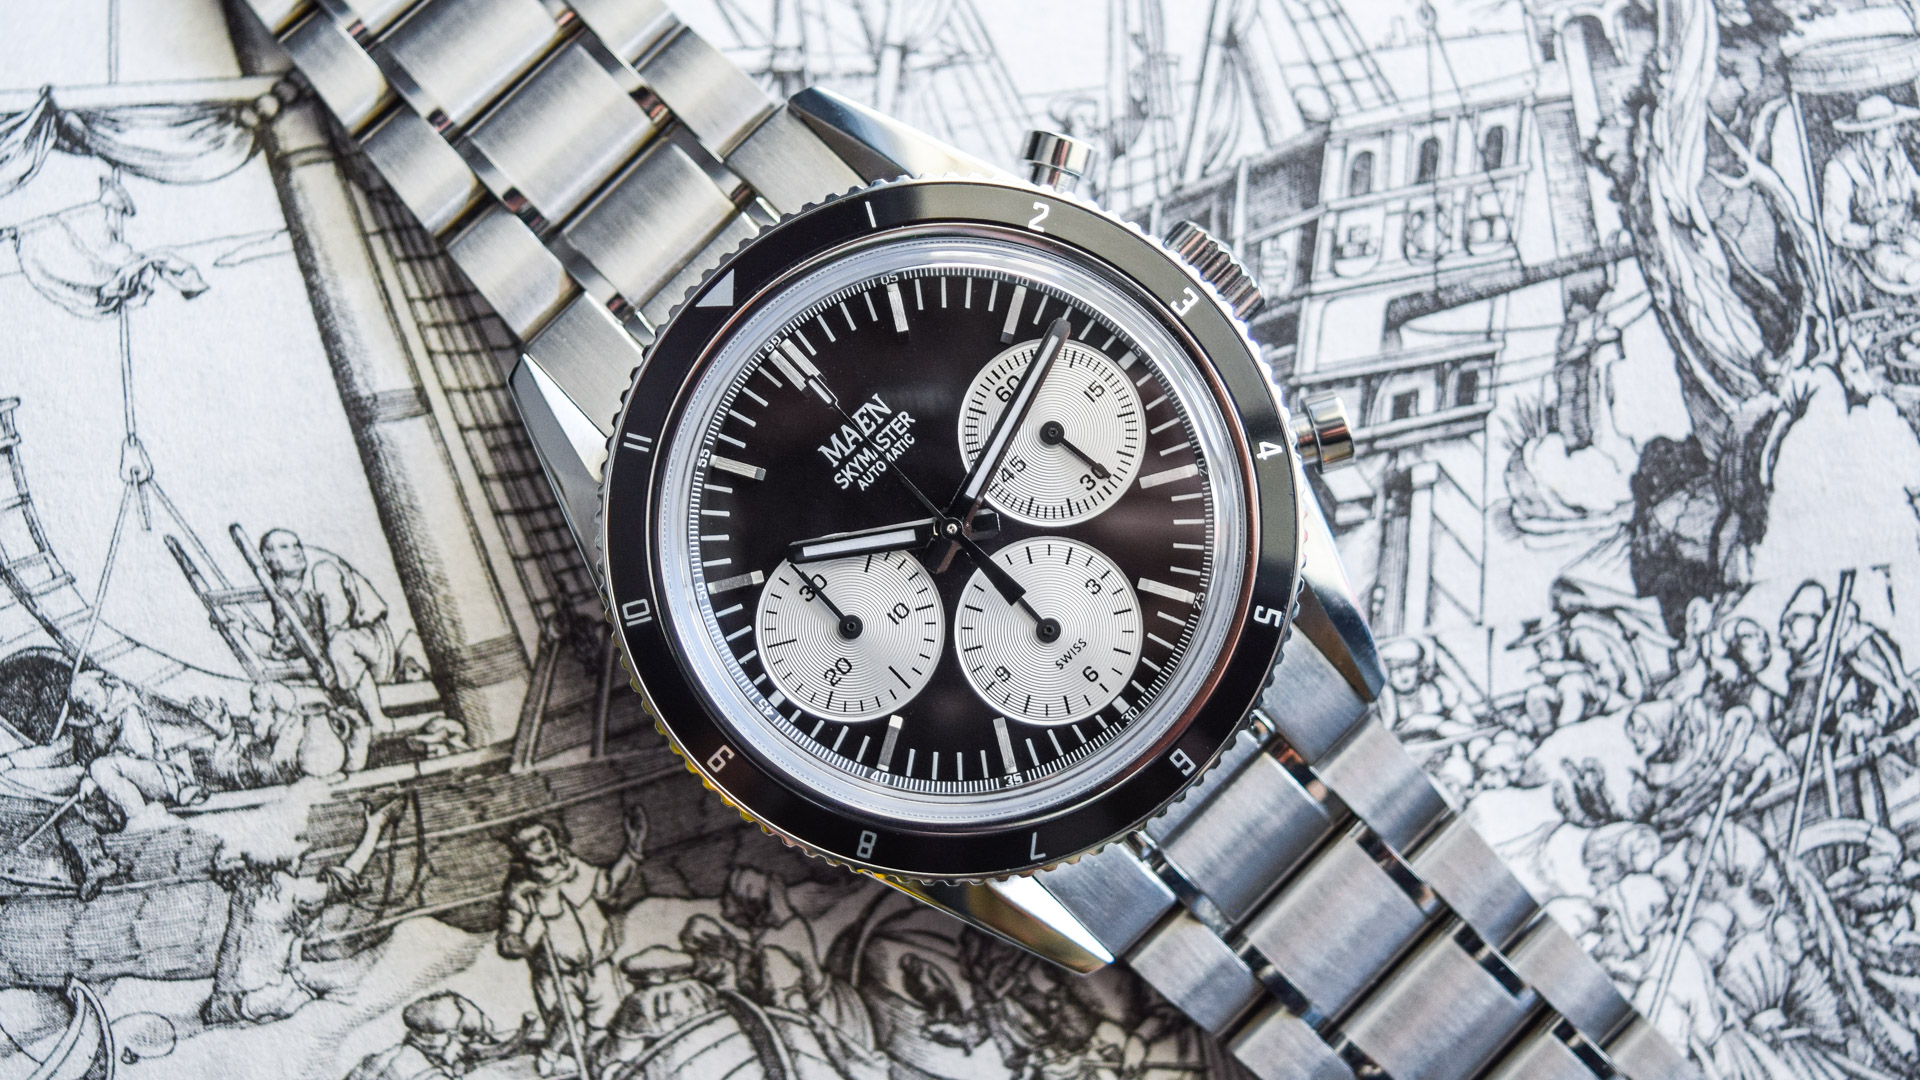 Watch Review: Maen Skymaster 38 Chronograph